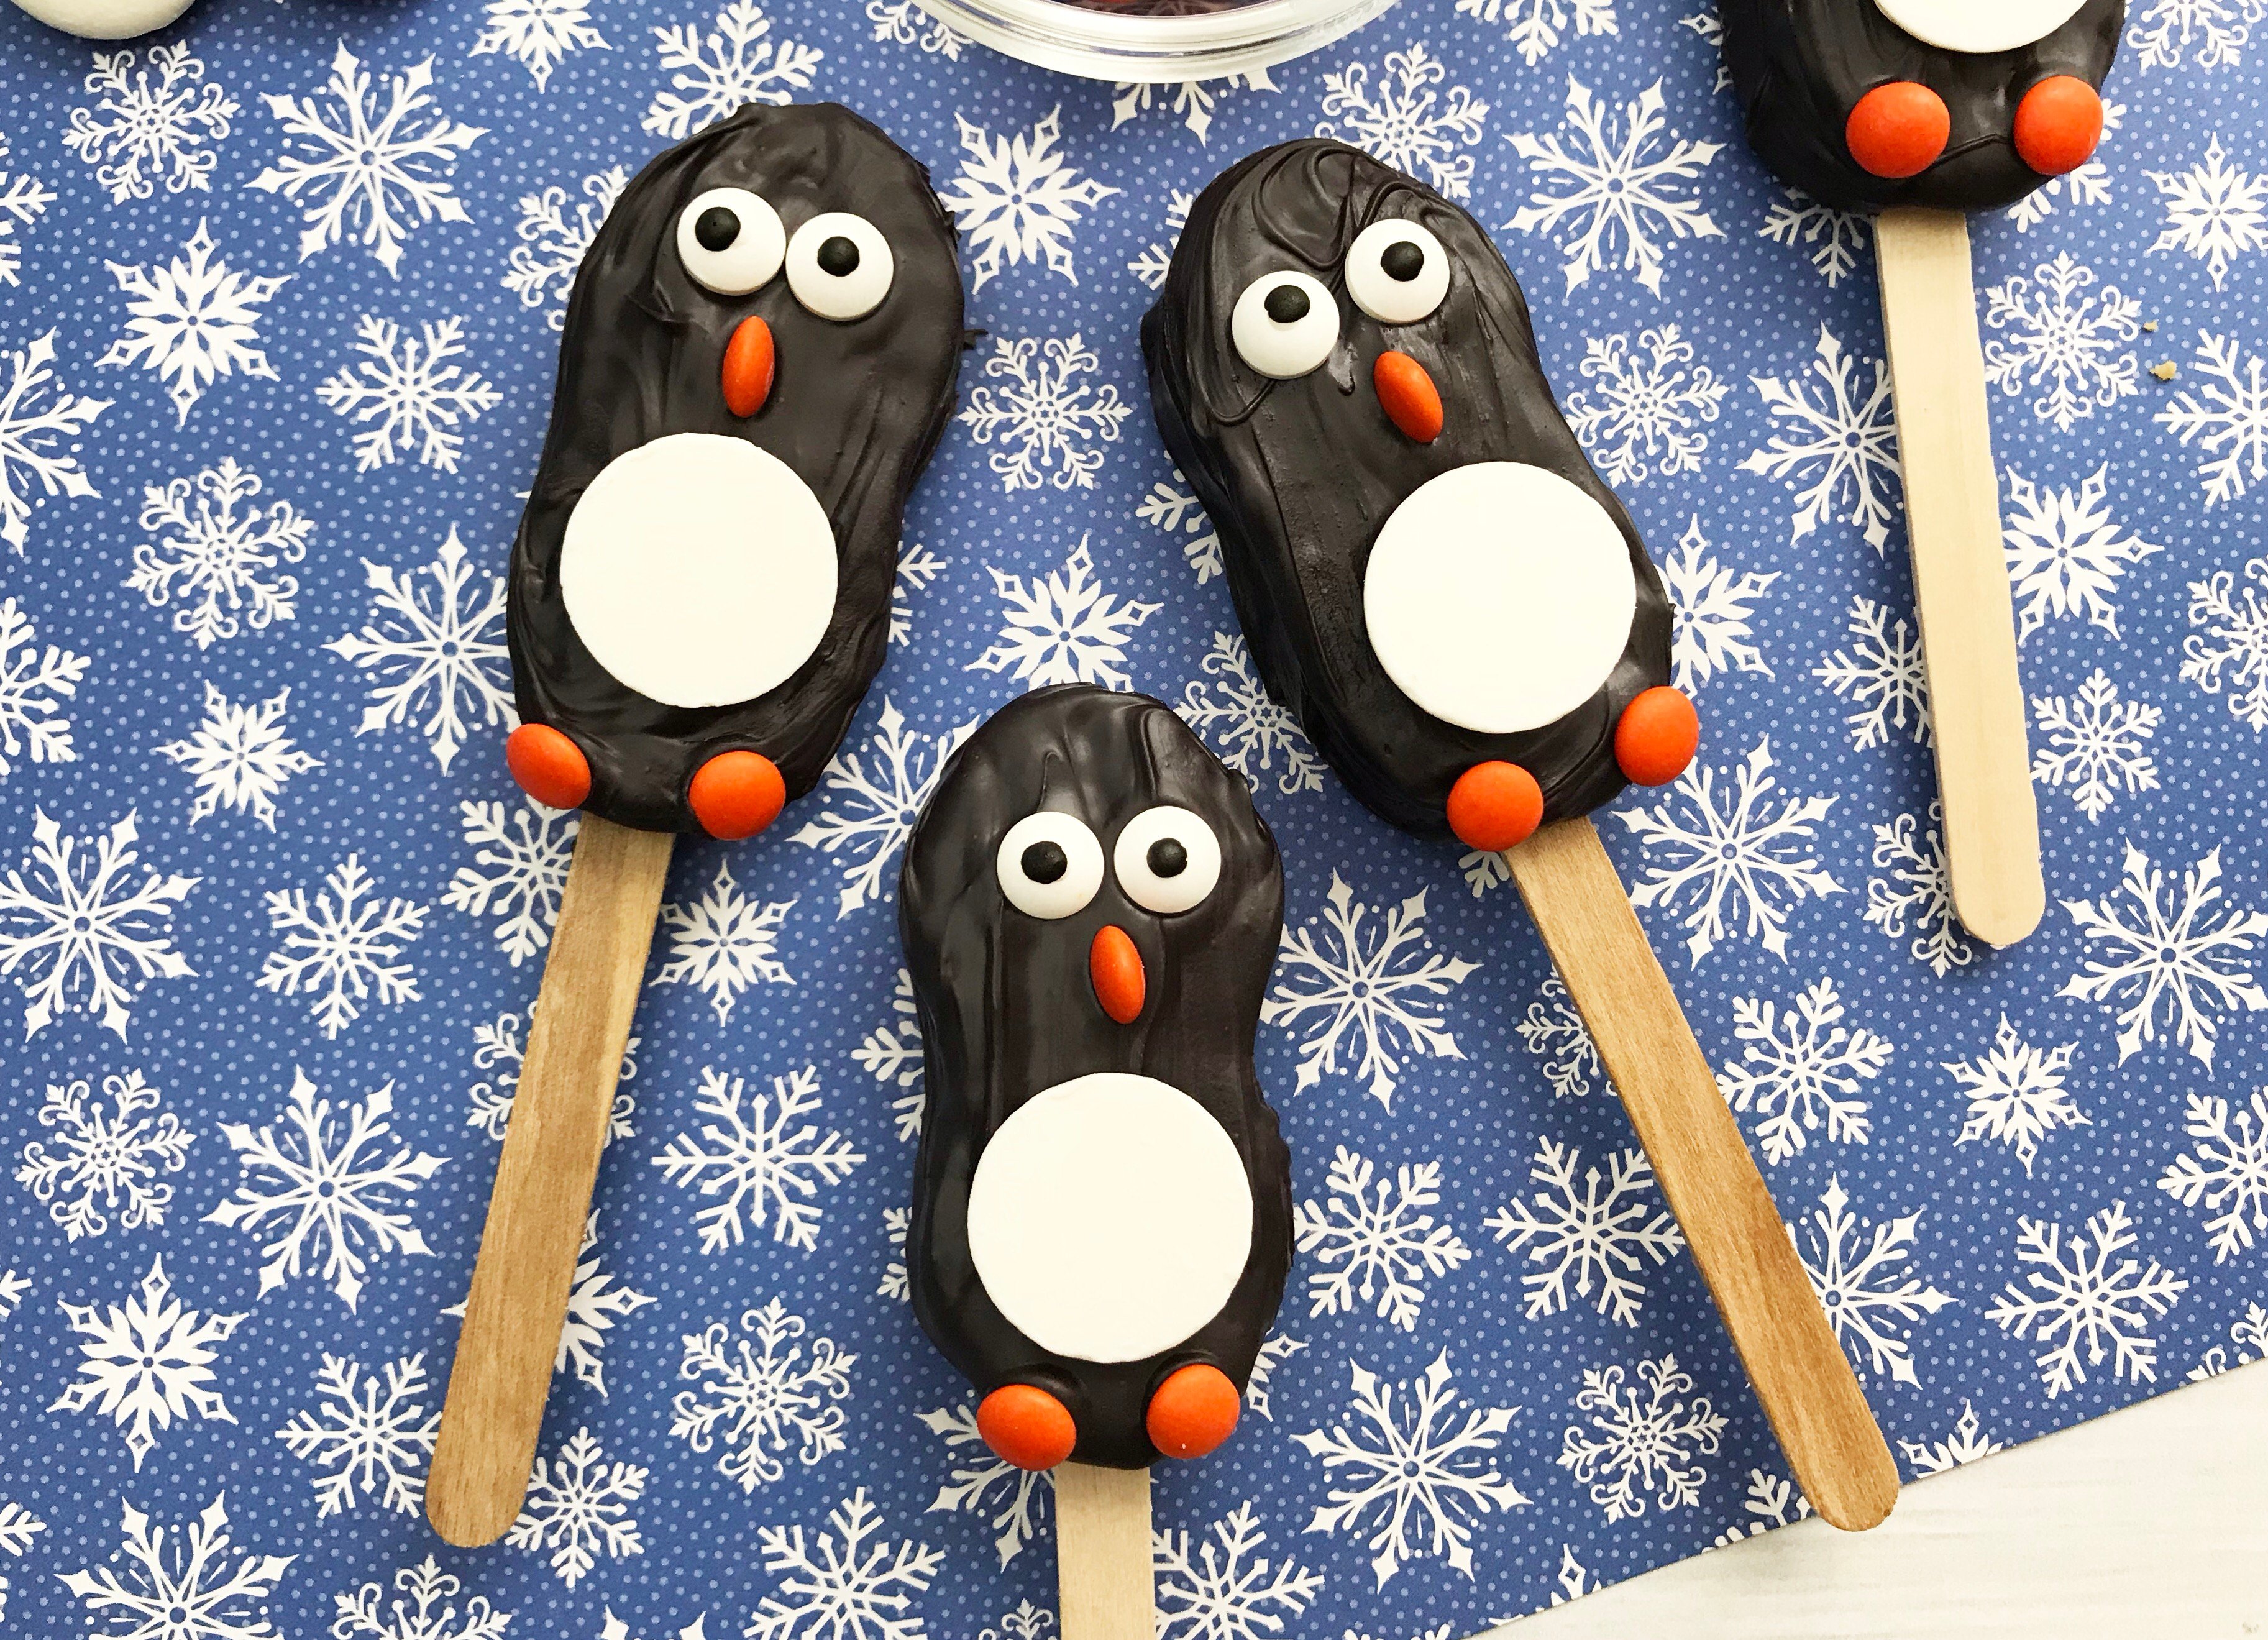 Penguin Nutter Butter Cookies on Blue Background with White Snowflakes